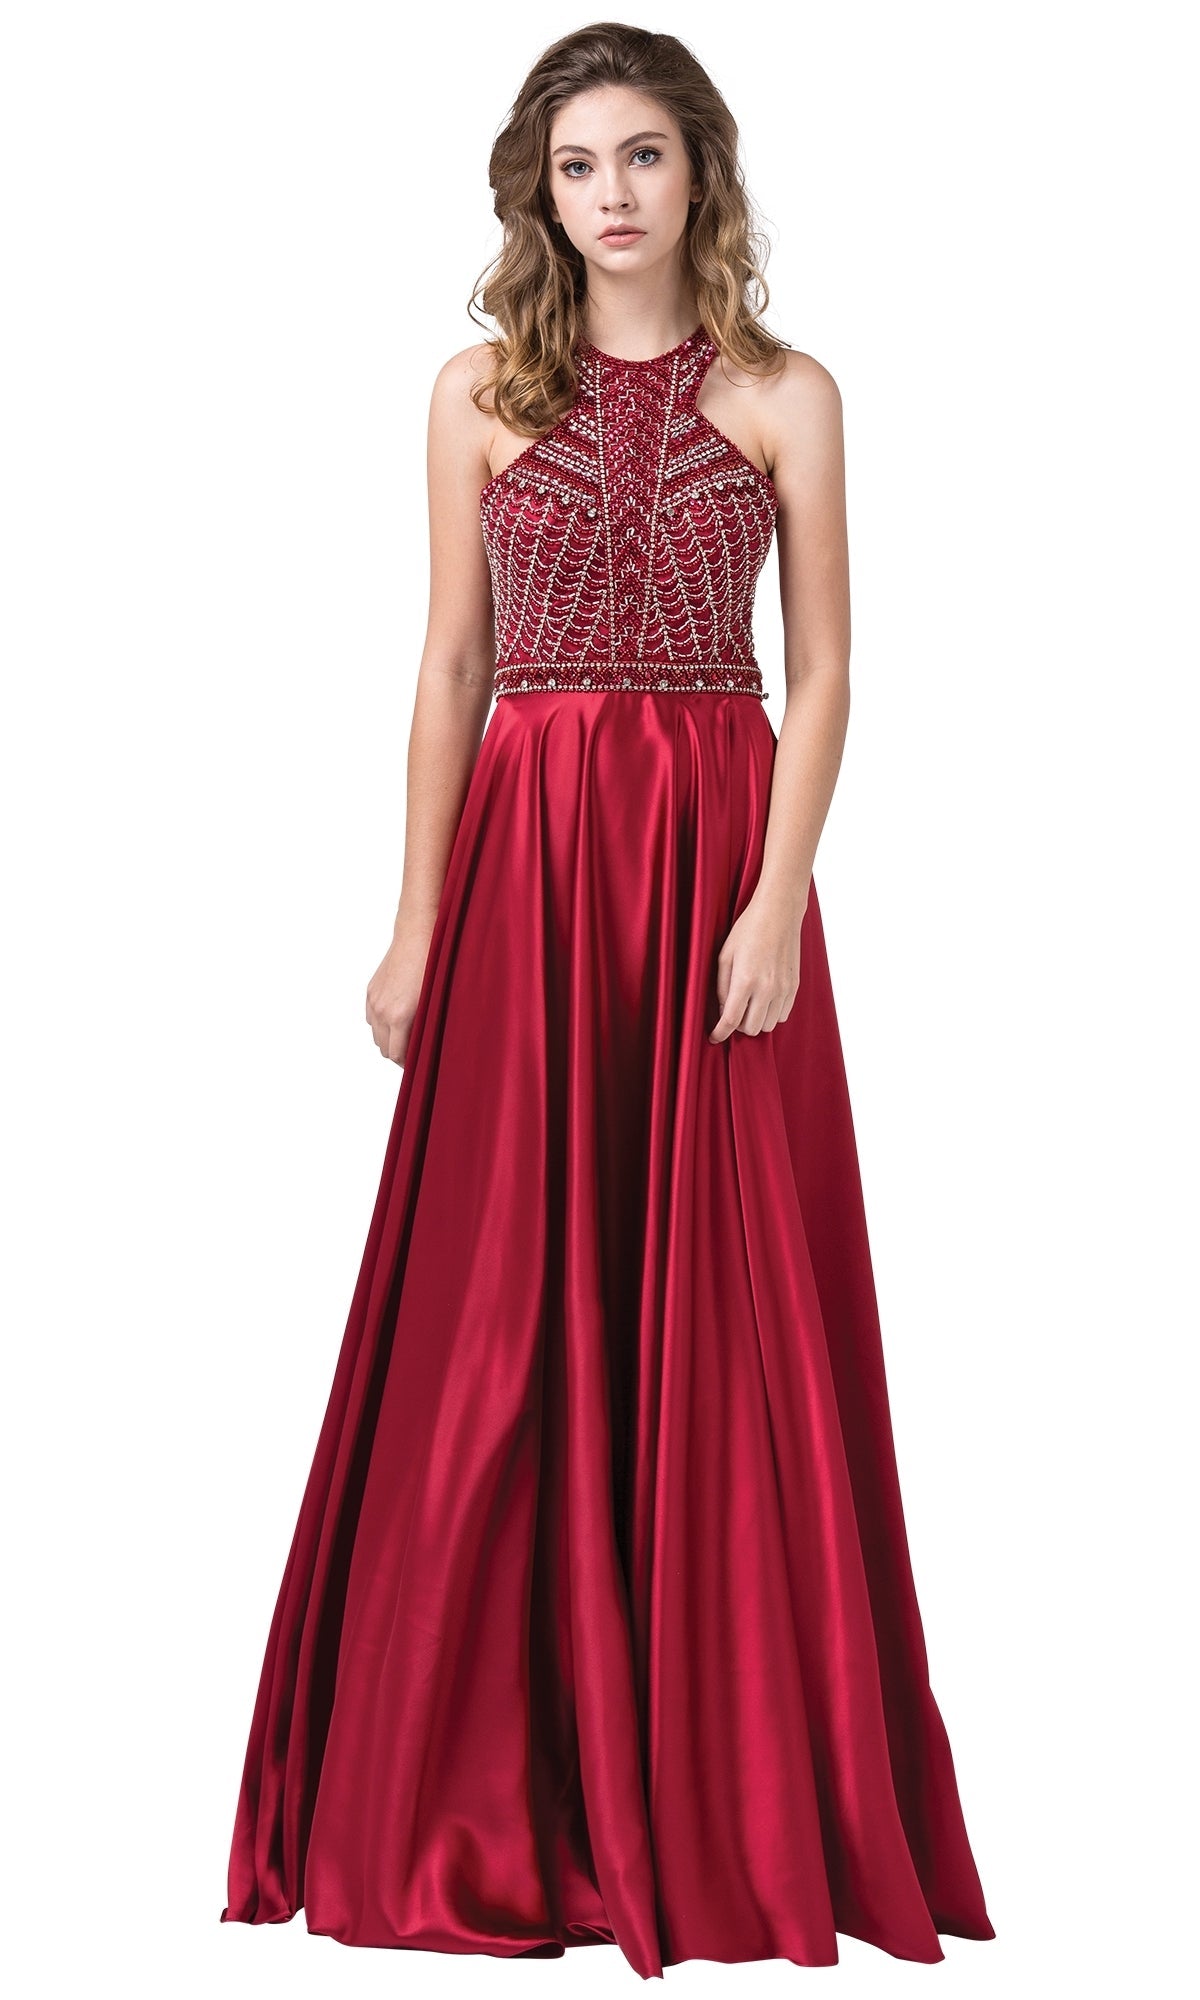 Burgundy A-Line High-Neck Formal Dress with Beaded Bodice